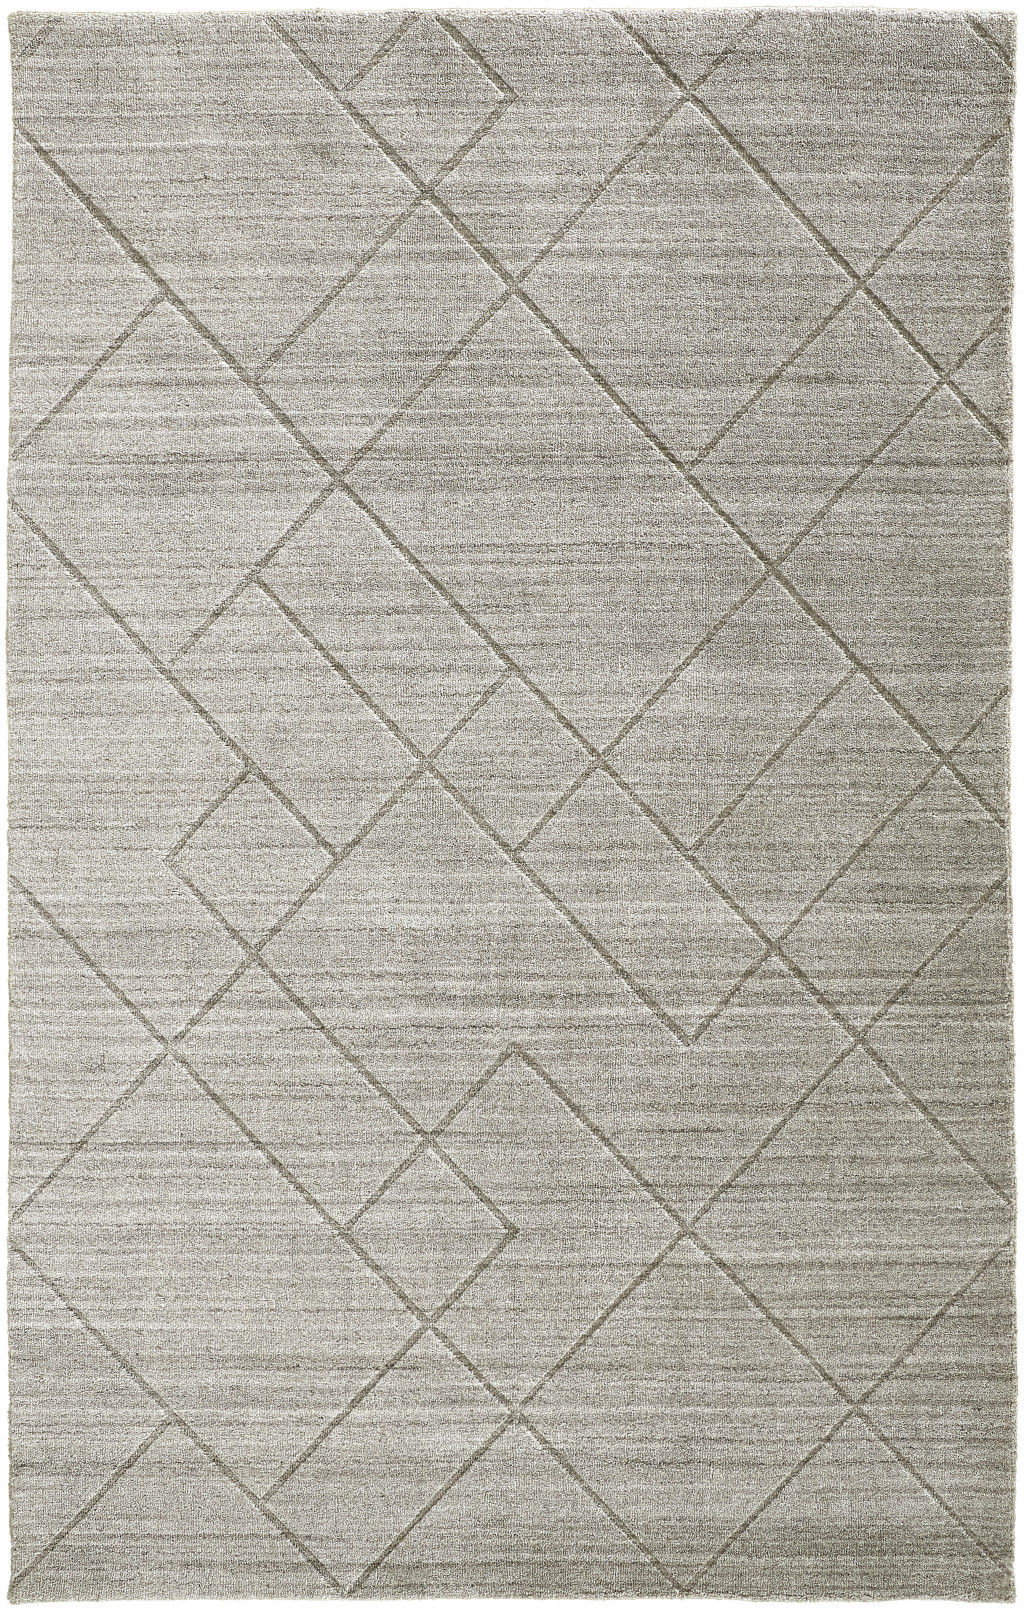 9' X 12' Ivory And Silver Striped Hand Woven Area Rug-514787-1